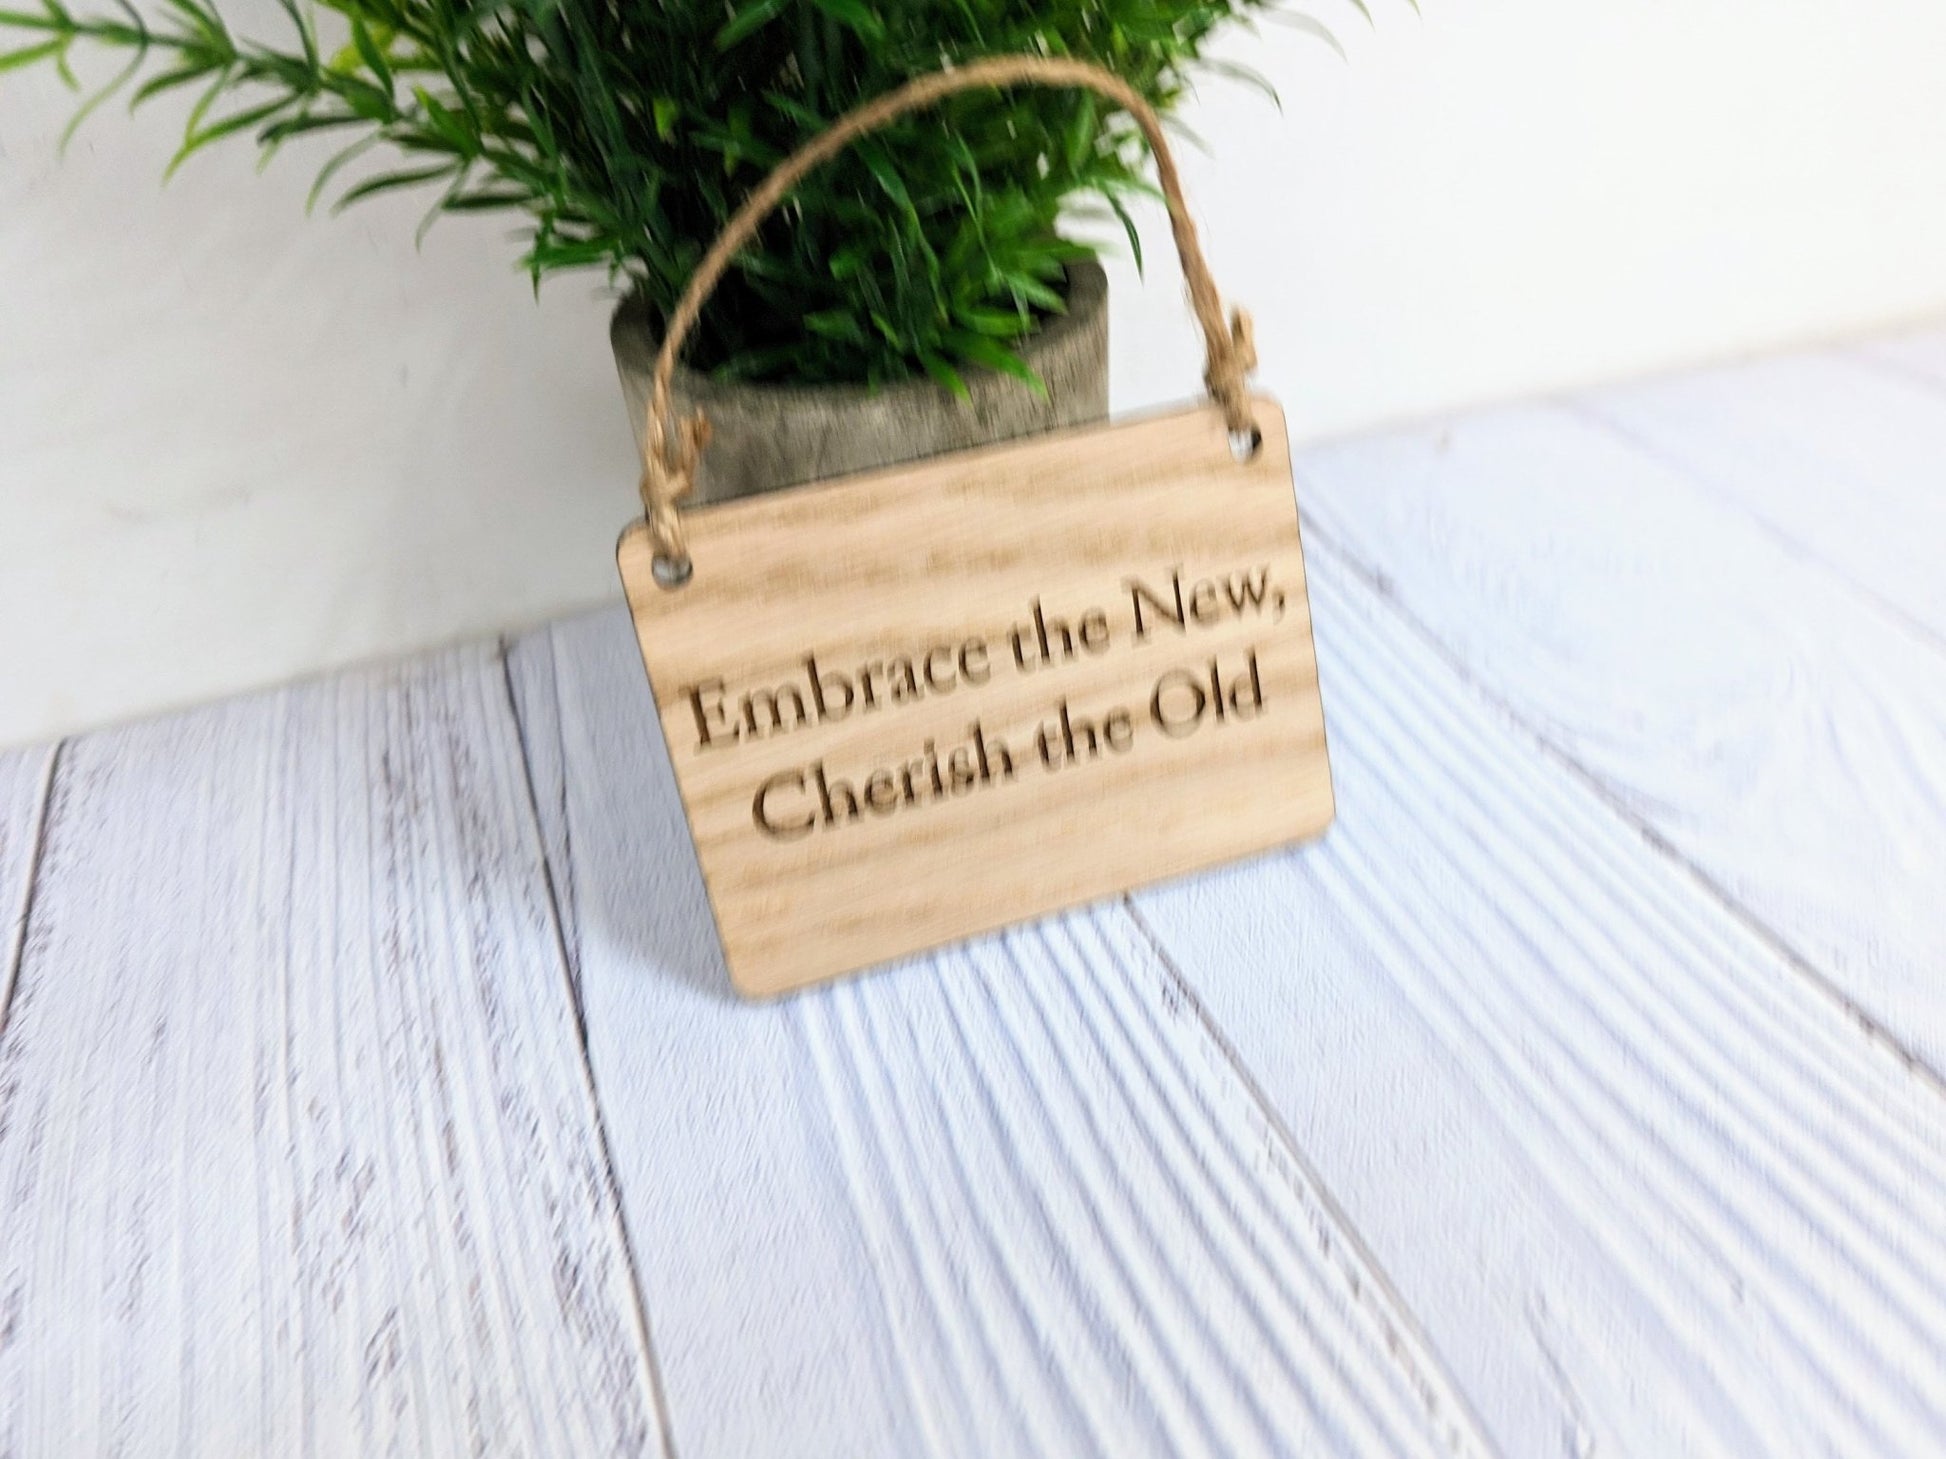 Embrace the Old, Cherish the New Oak Sign - Personalisable, Reflective Decor - CherryGroveCraft